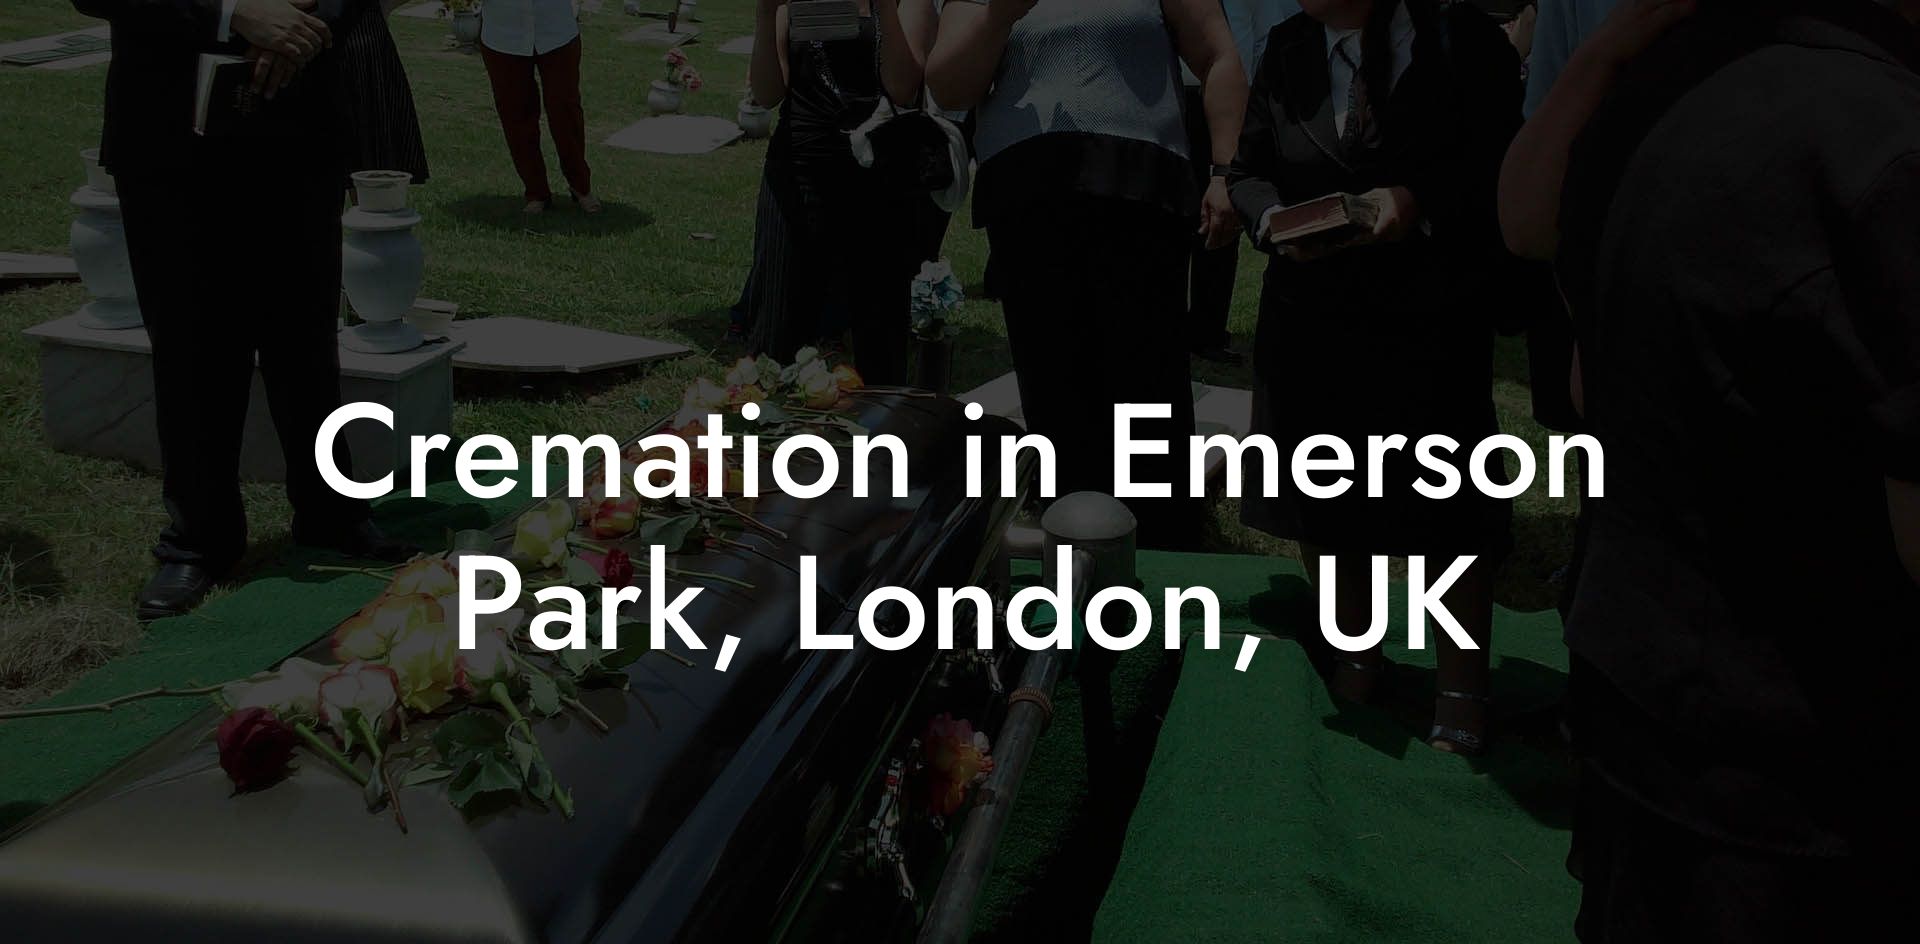 Cremation in Emerson Park, London, UK